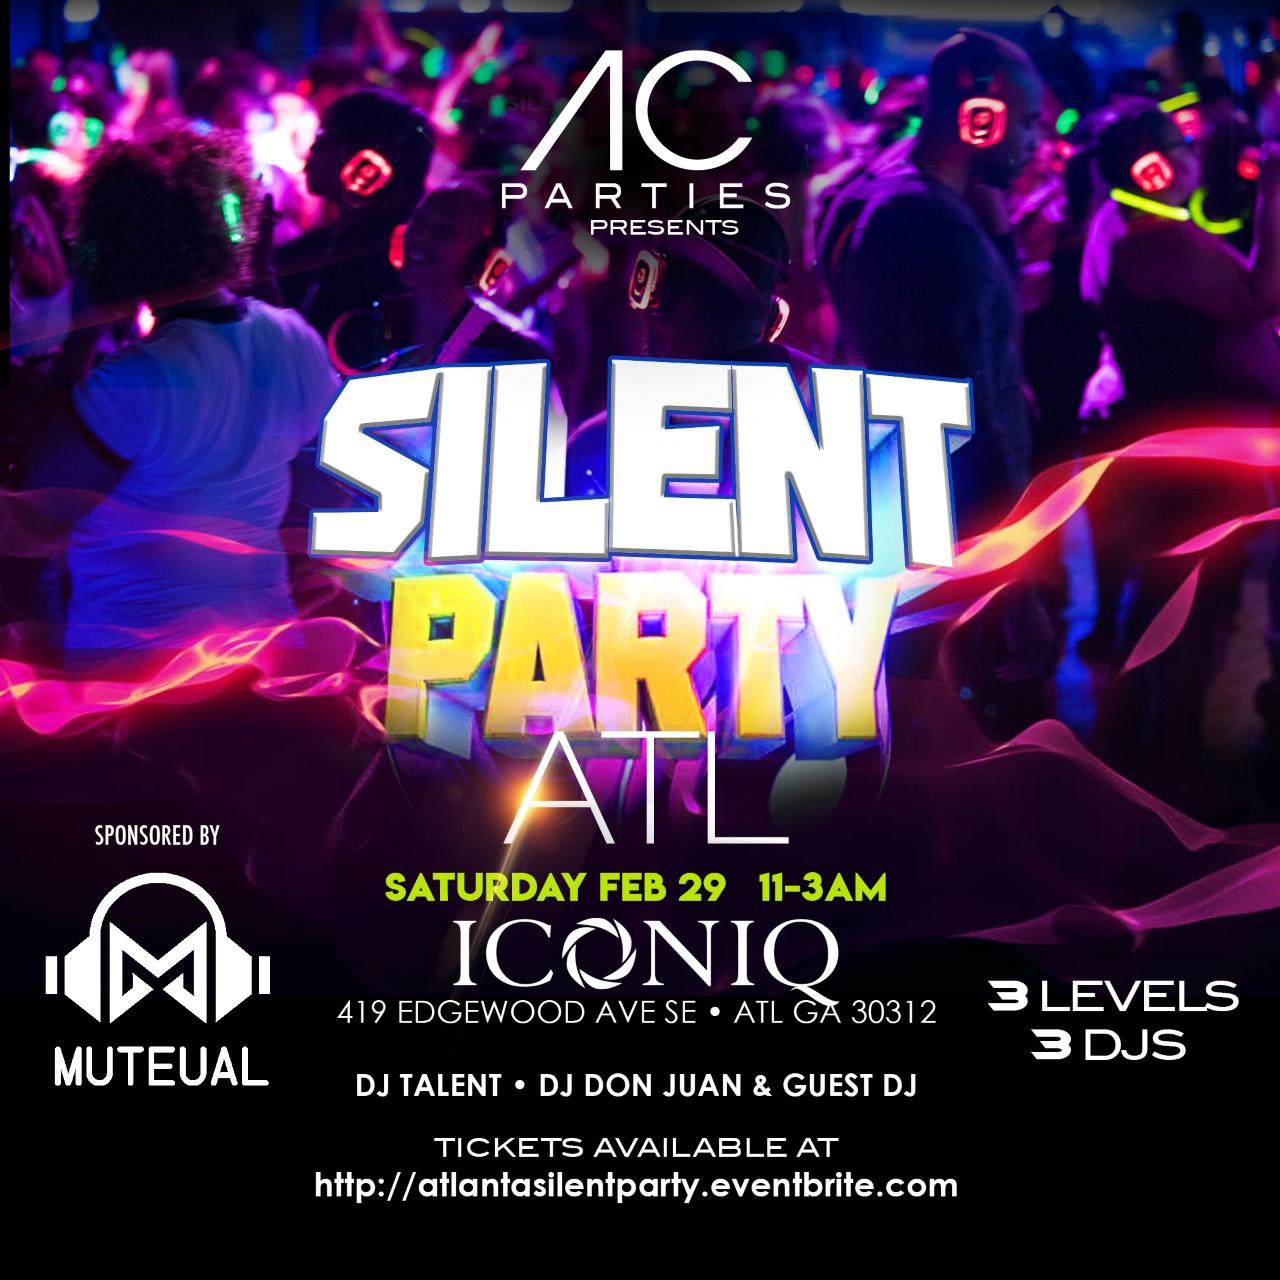 Silent Party ATL